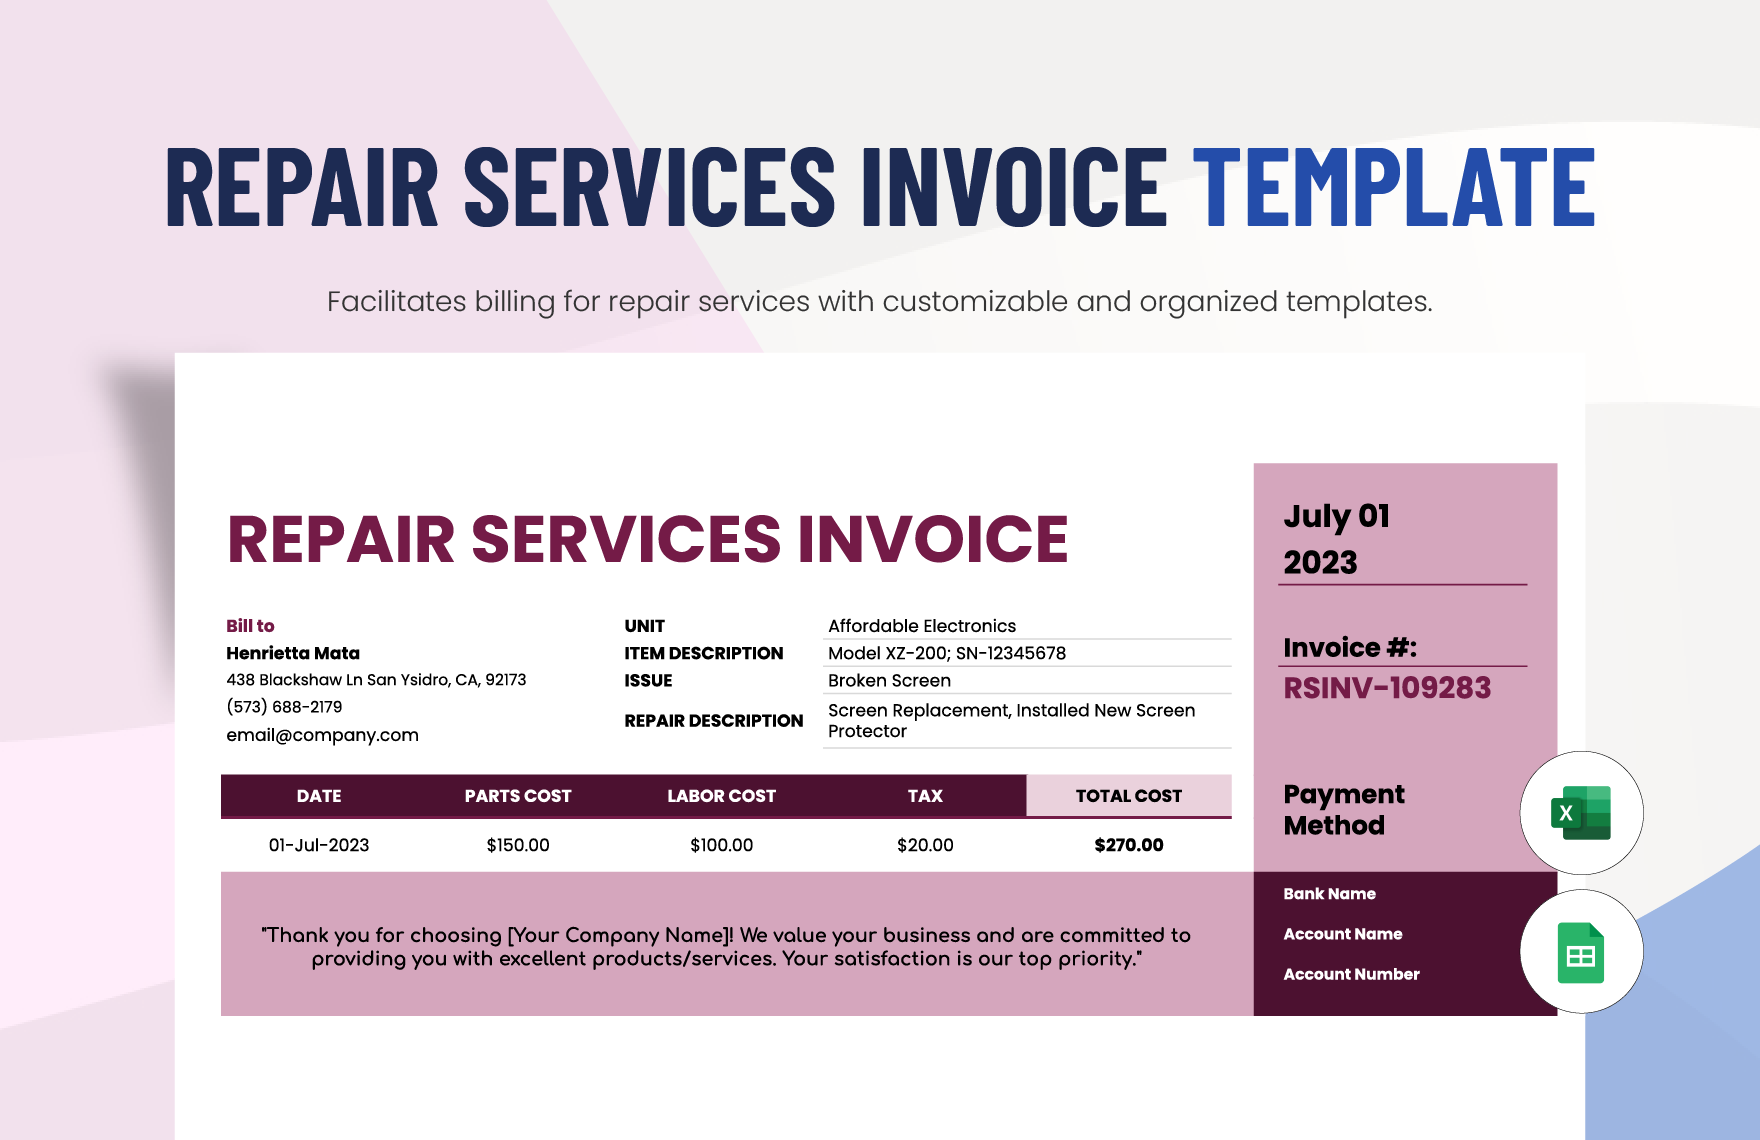 Repair Services Invoice Template in Excel, Google Sheets